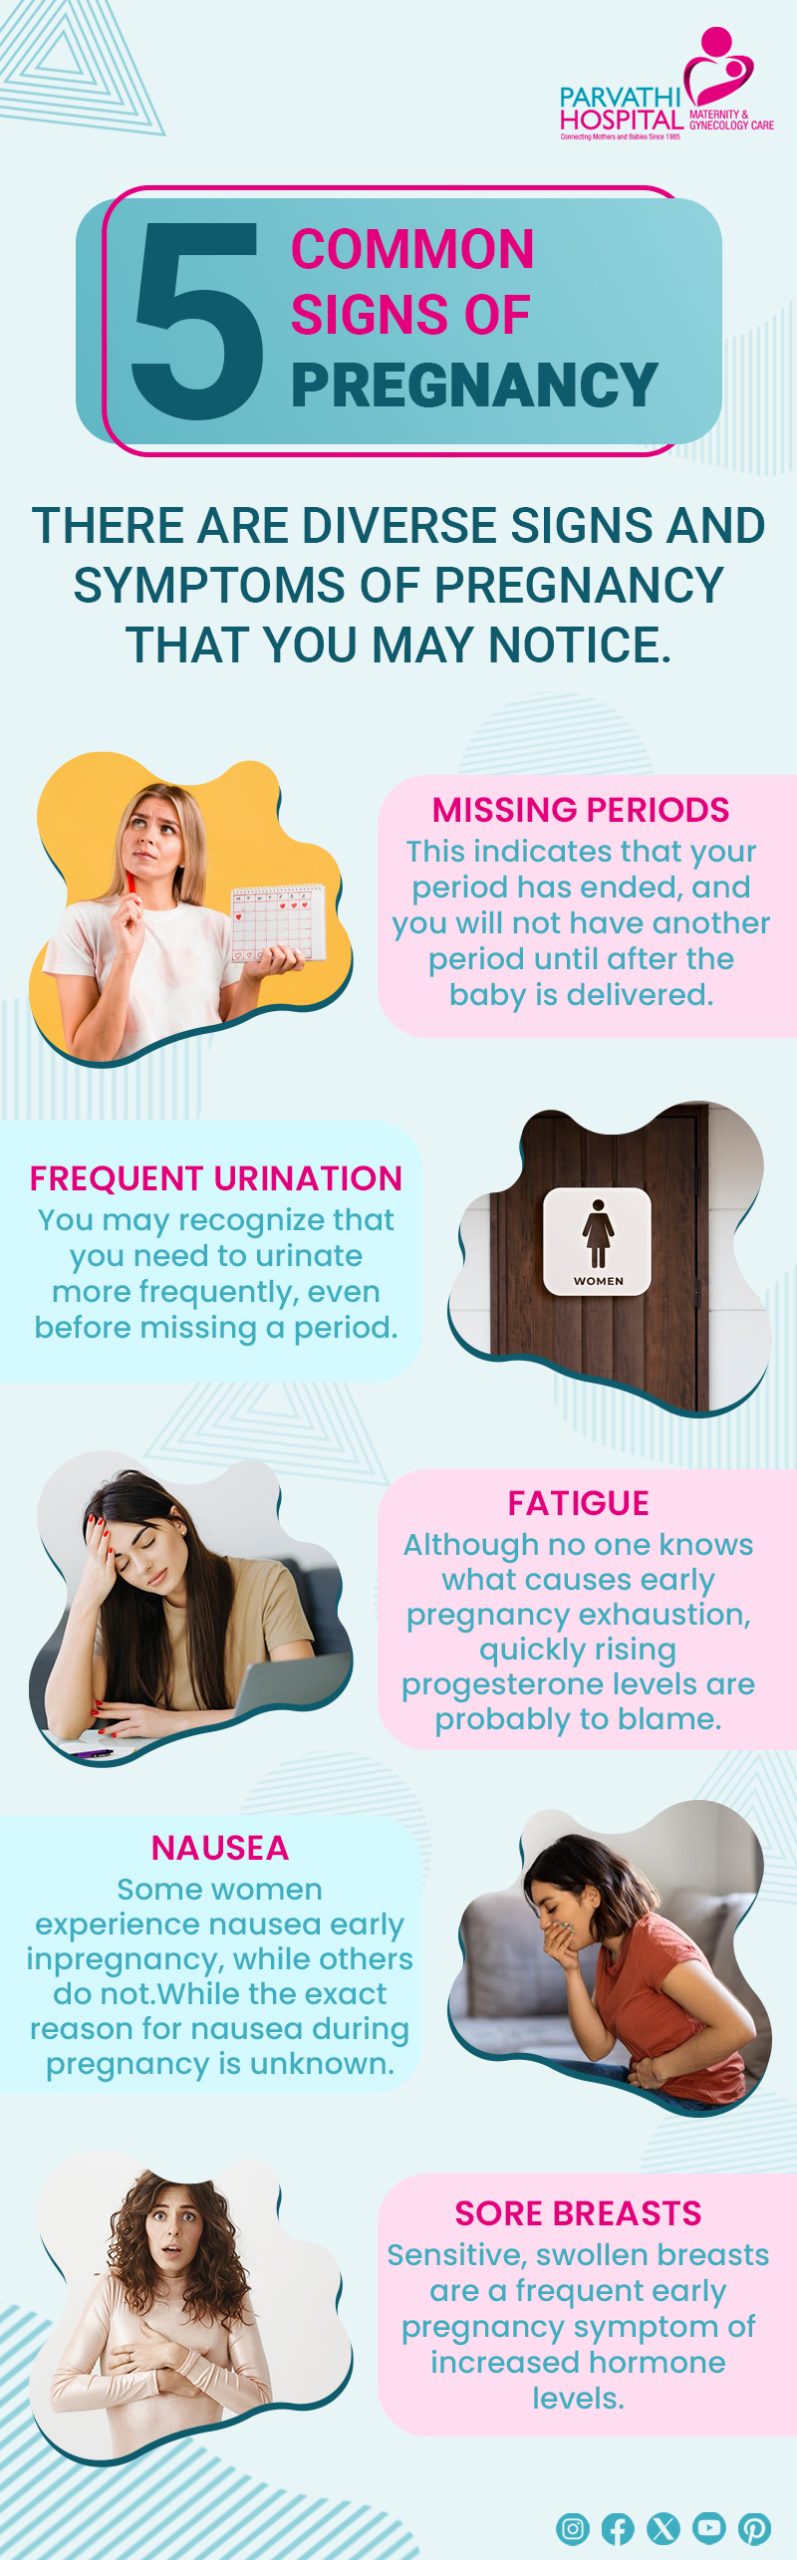 https://www.parvathihospital.com/wp-content/uploads/2022/04/5-Common-Signs-of-Pregnancy-scaled.jpg